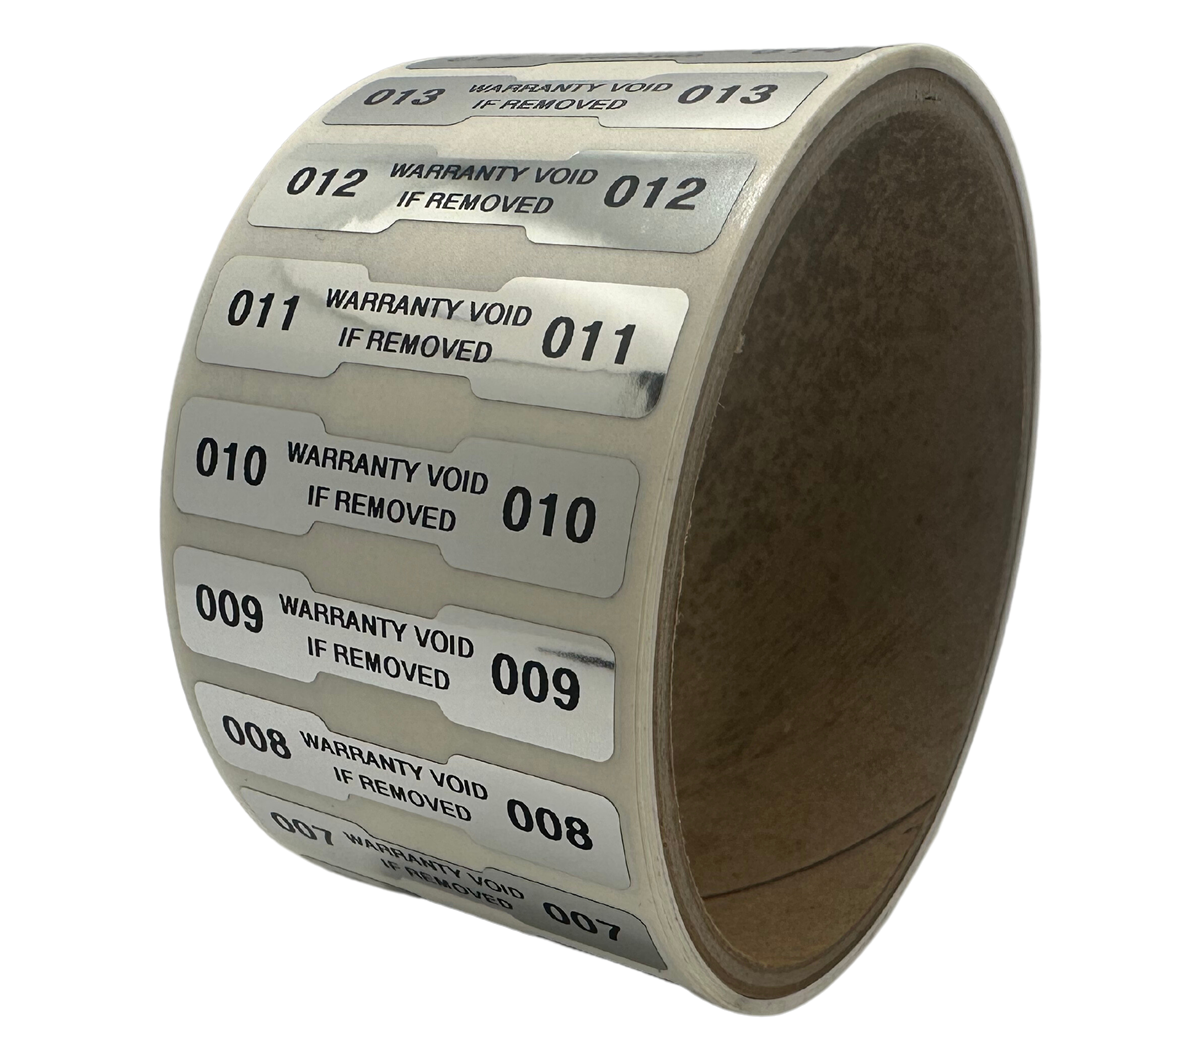 500 Finish Tamper Evident Metallic Silver / Chrome Non Residue Security Labels TamperGuard® Seal Sticker, Dogbone 1.75" x 0.375" (44mm x 9mm). Printed: Warranty Void if Removed + Serialized